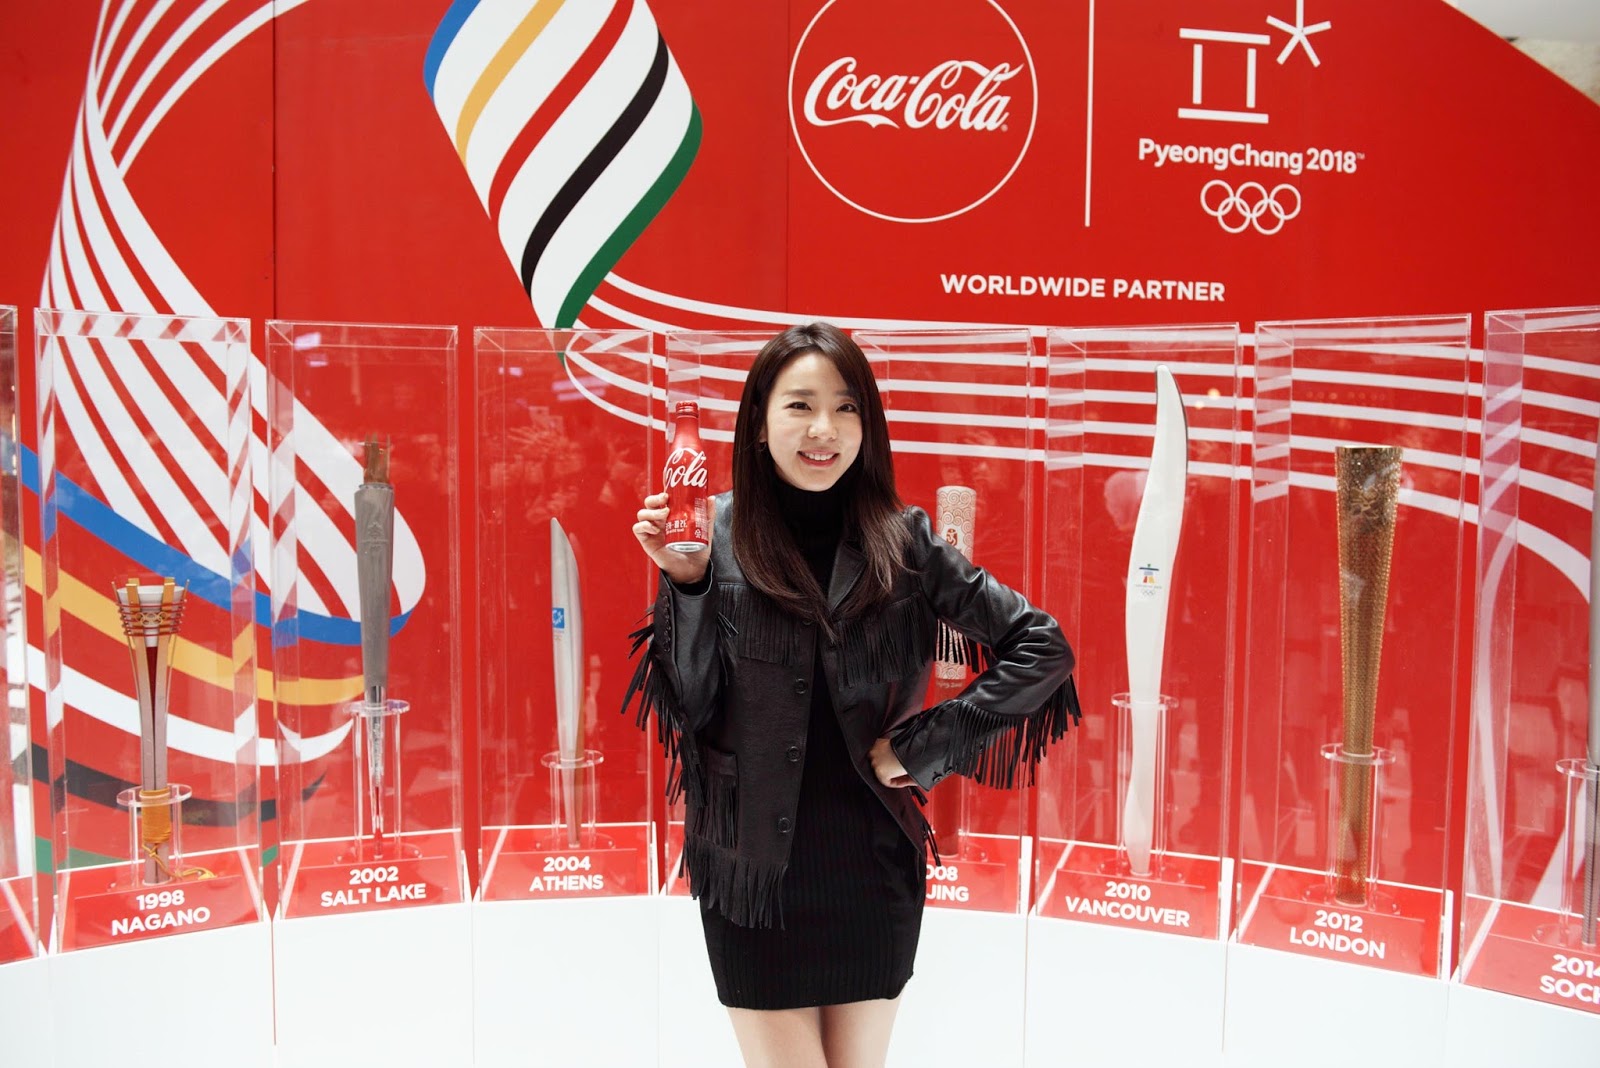 Coca-Cola Unveils Olympic Packaging with Pyeongchang 2018 on the Horizon